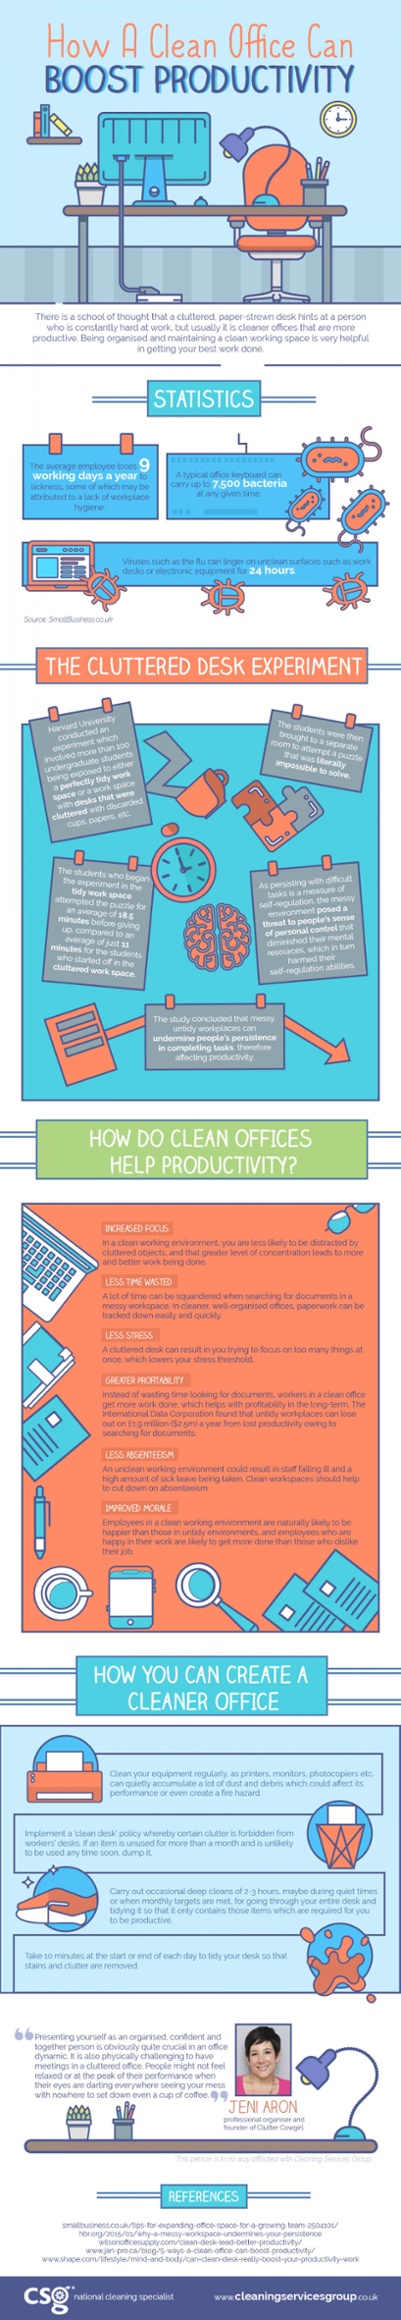 how a clean office can boost productivity infographic